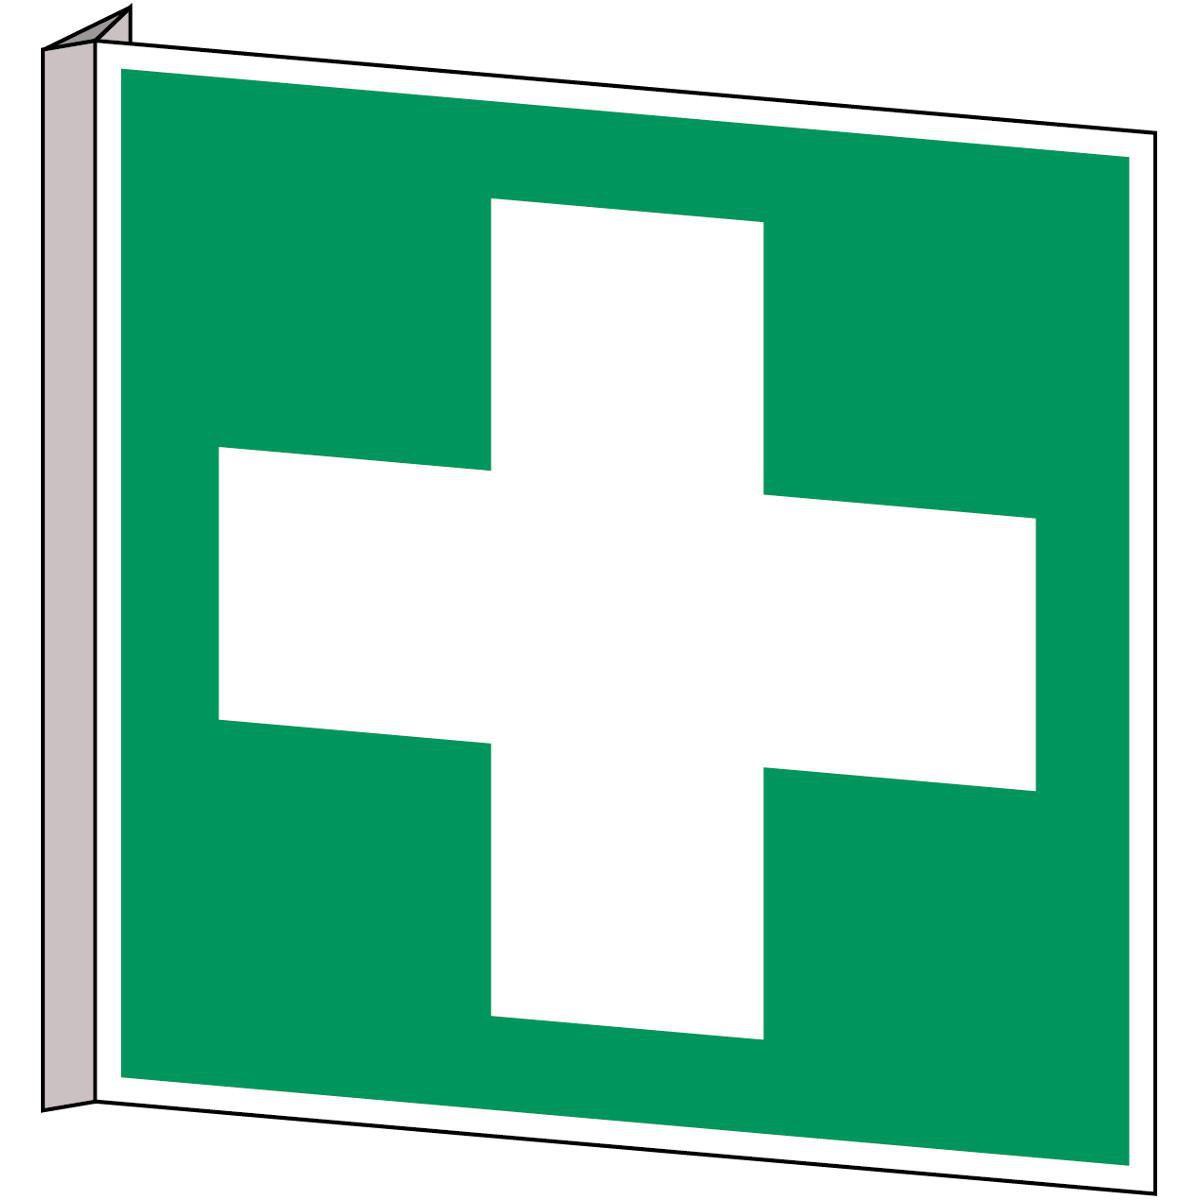 Brady PIC E003-151X151-BIPVC-CRD1 W128410572 ISO Safety Sign - First aid 